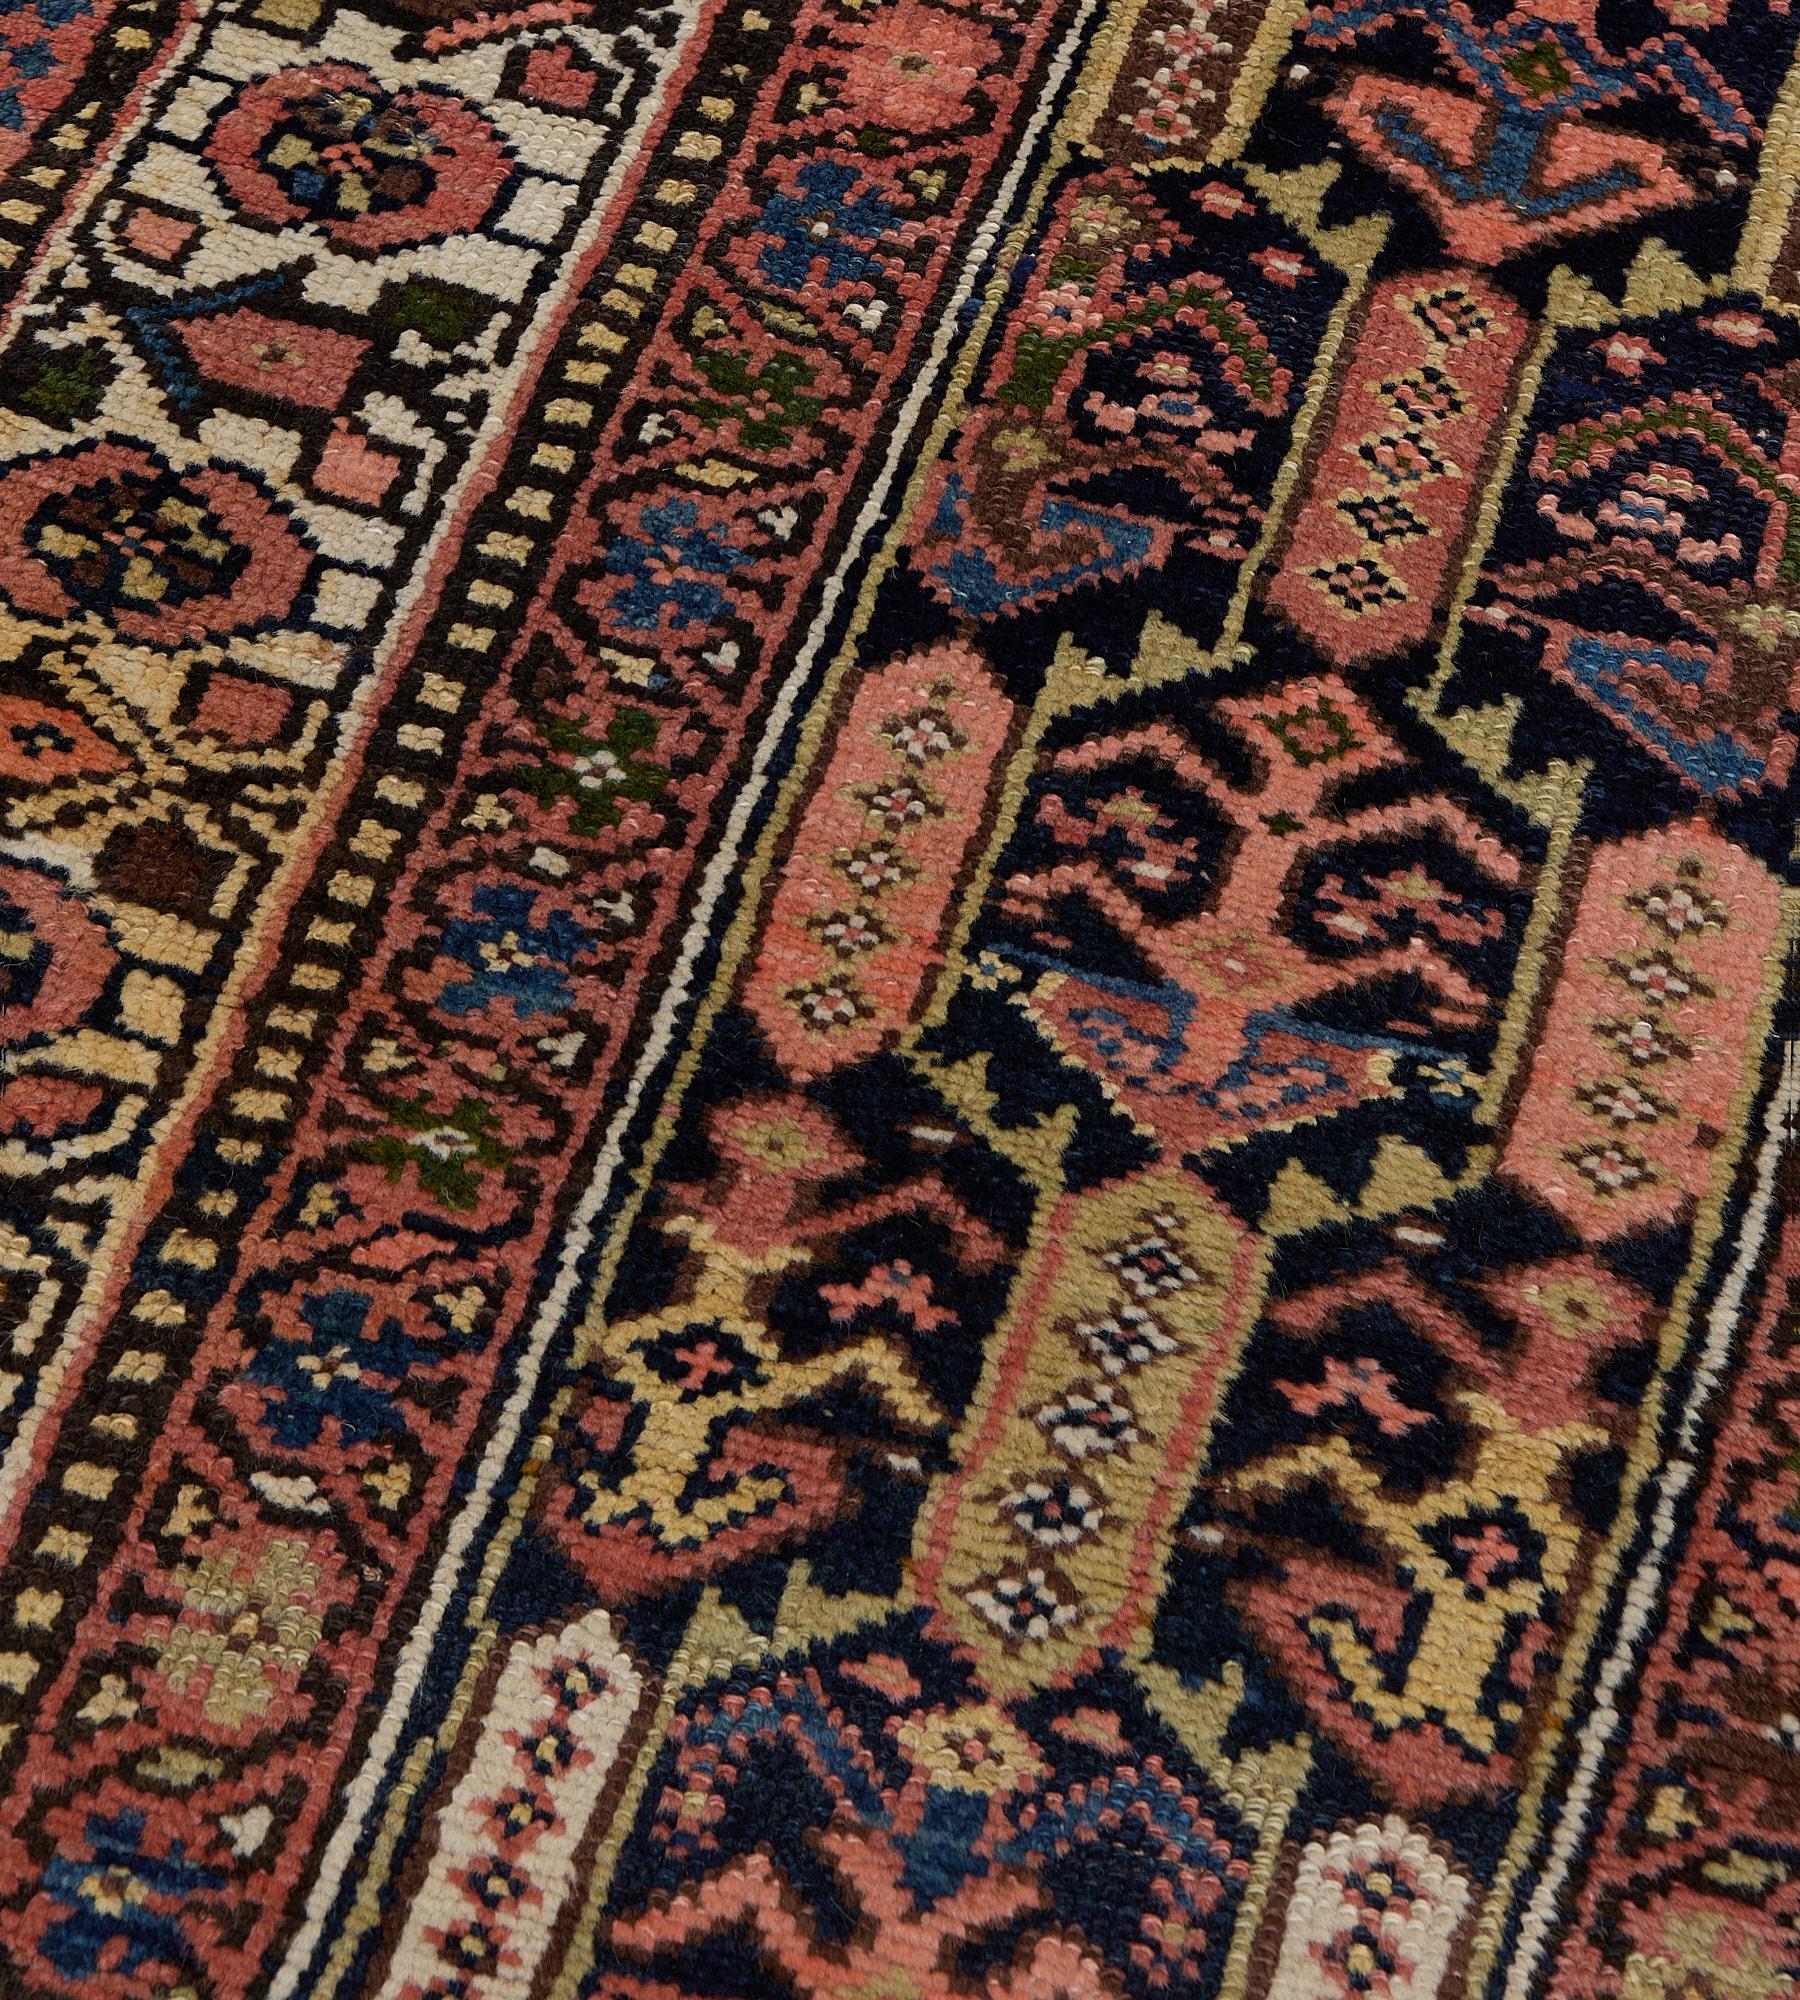 Wool Antique Hand-Woven Circa-1900 Persian Kurdish Runner In Good Condition For Sale In West Hollywood, CA